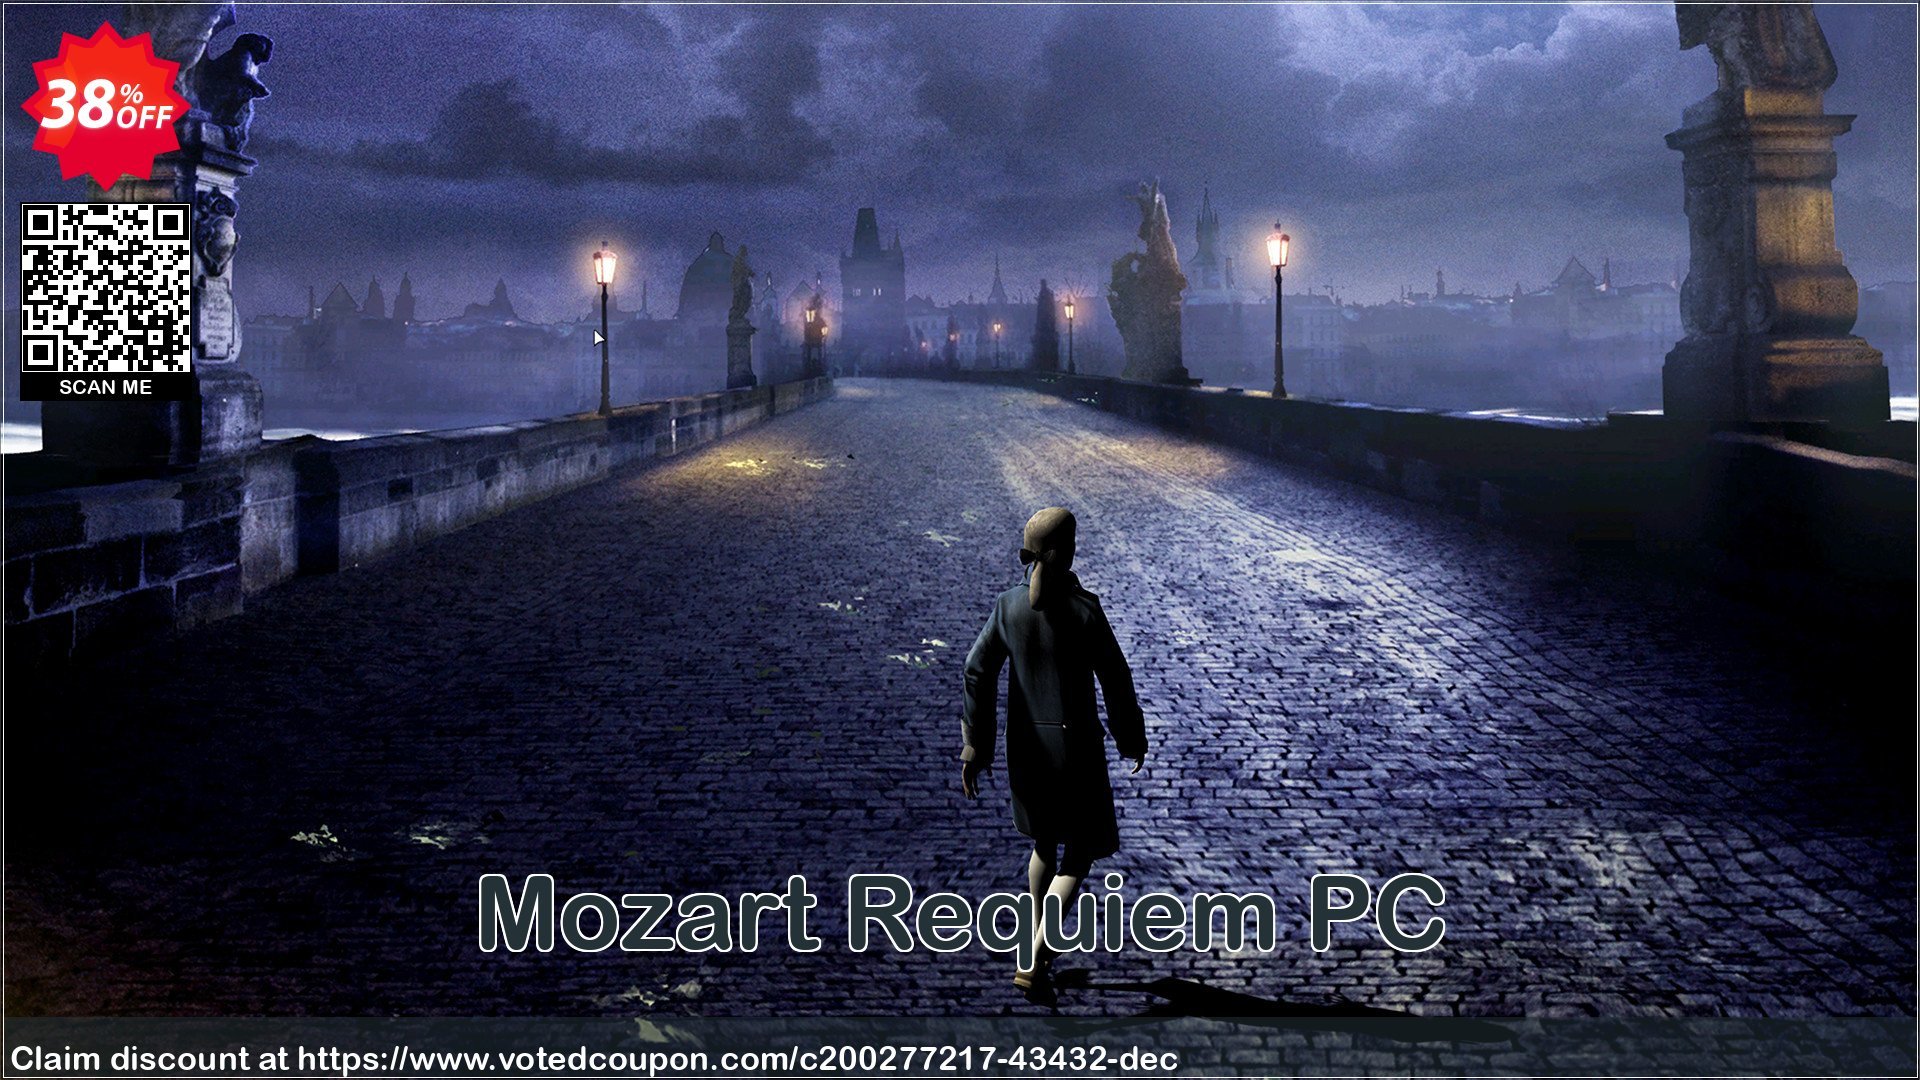 Mozart Requiem PC Coupon Code May 2024, 38% OFF - VotedCoupon